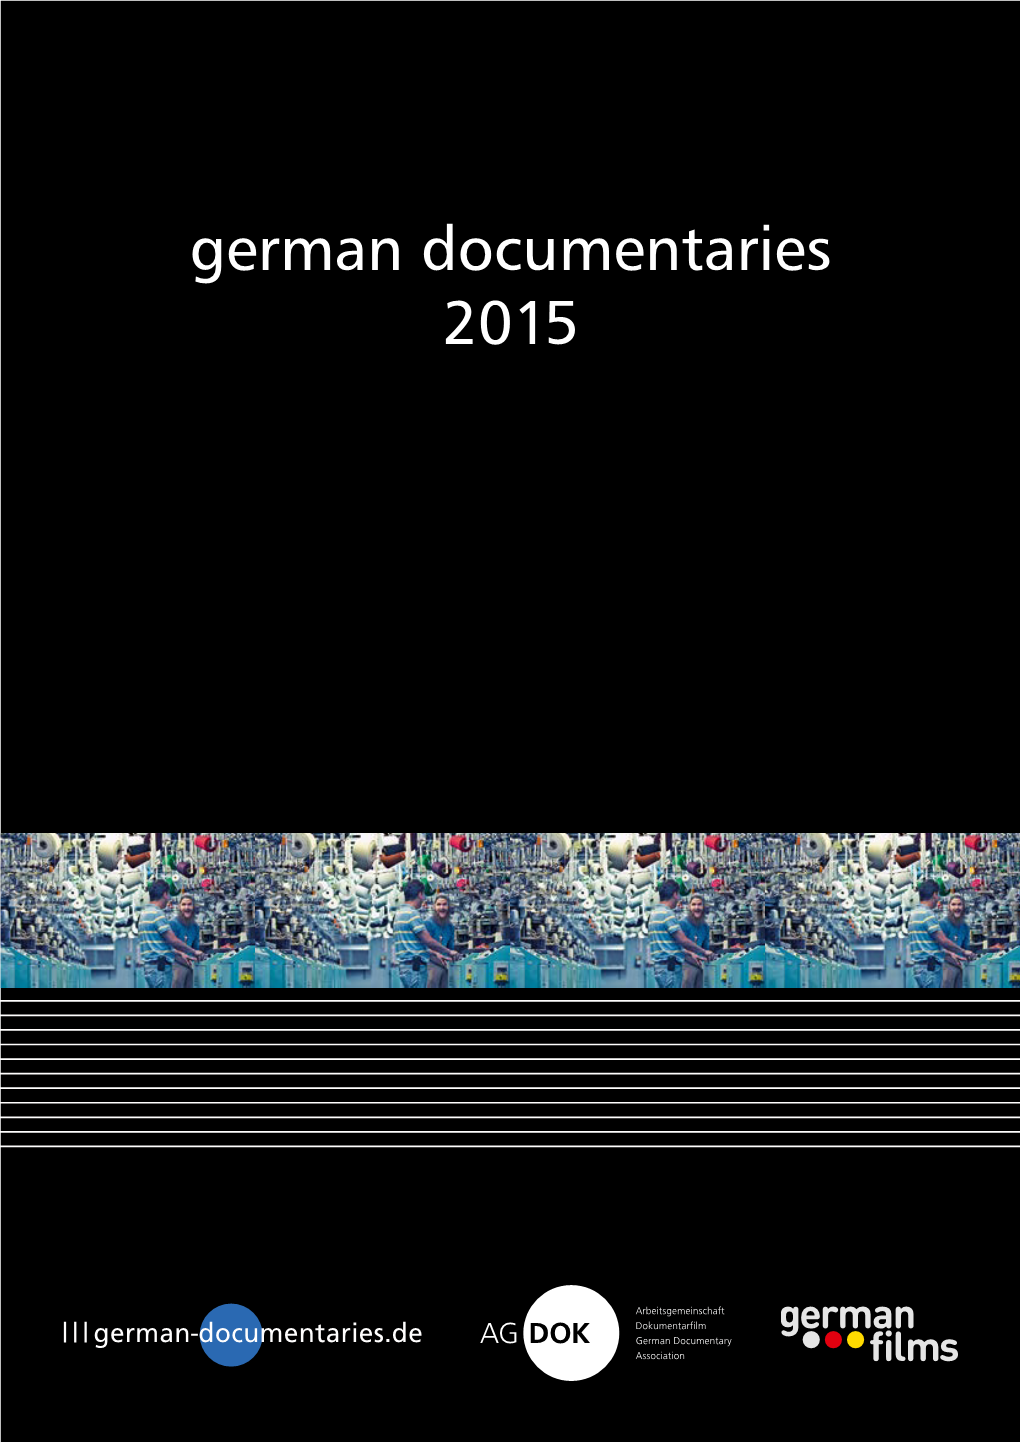 German Documentaries 2015 German Films Is the National Information and Advisory Center for the Promotion of German Films Worldwide